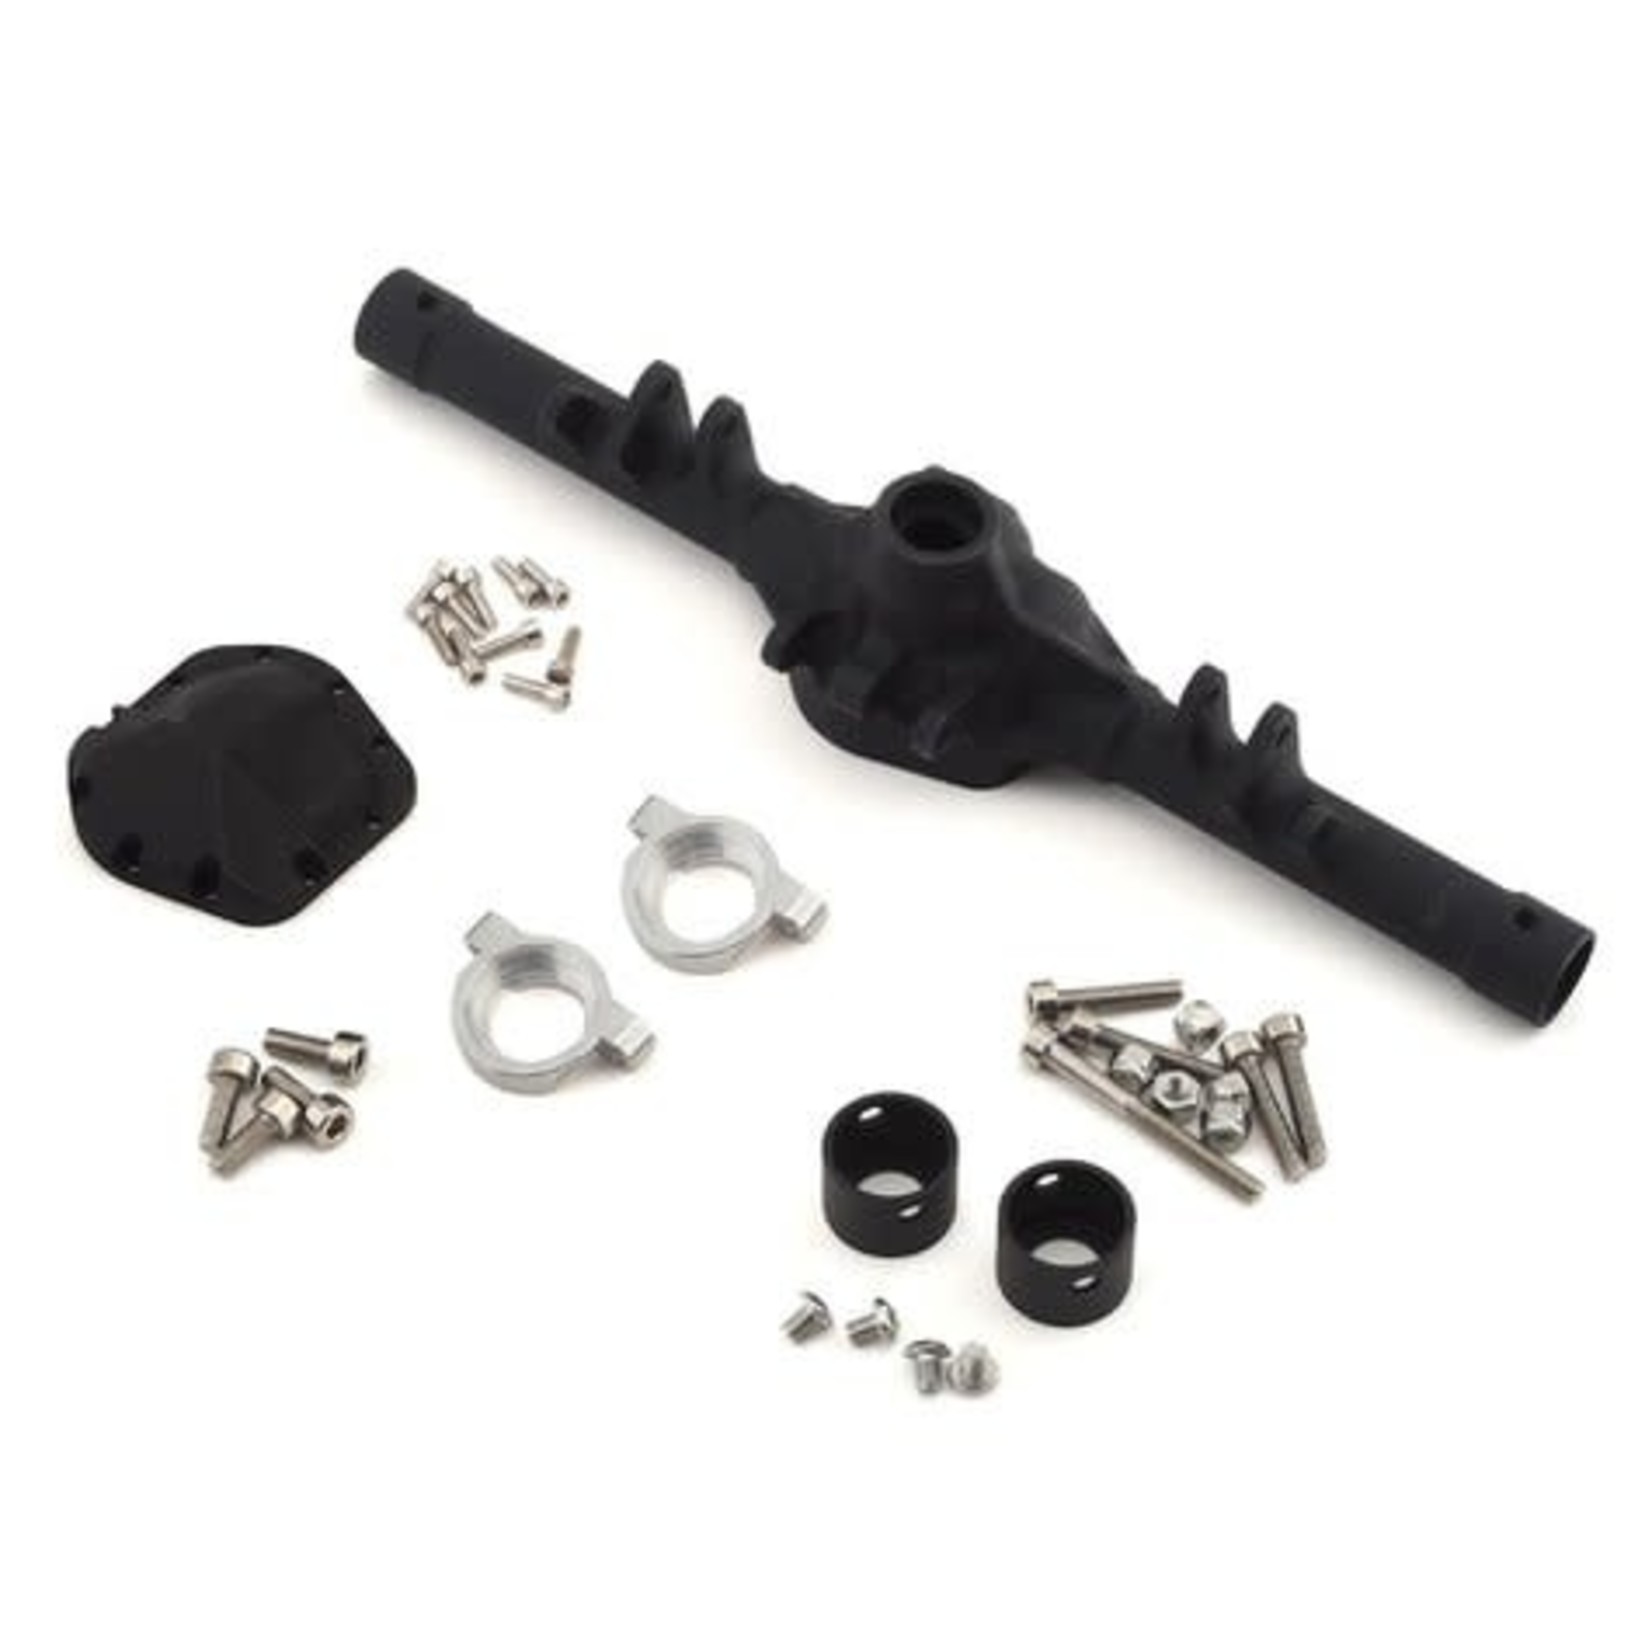 Vanquish Products Vanquish Products VS4-10 Currie D44 Rear Axle (Black) #VPS08380